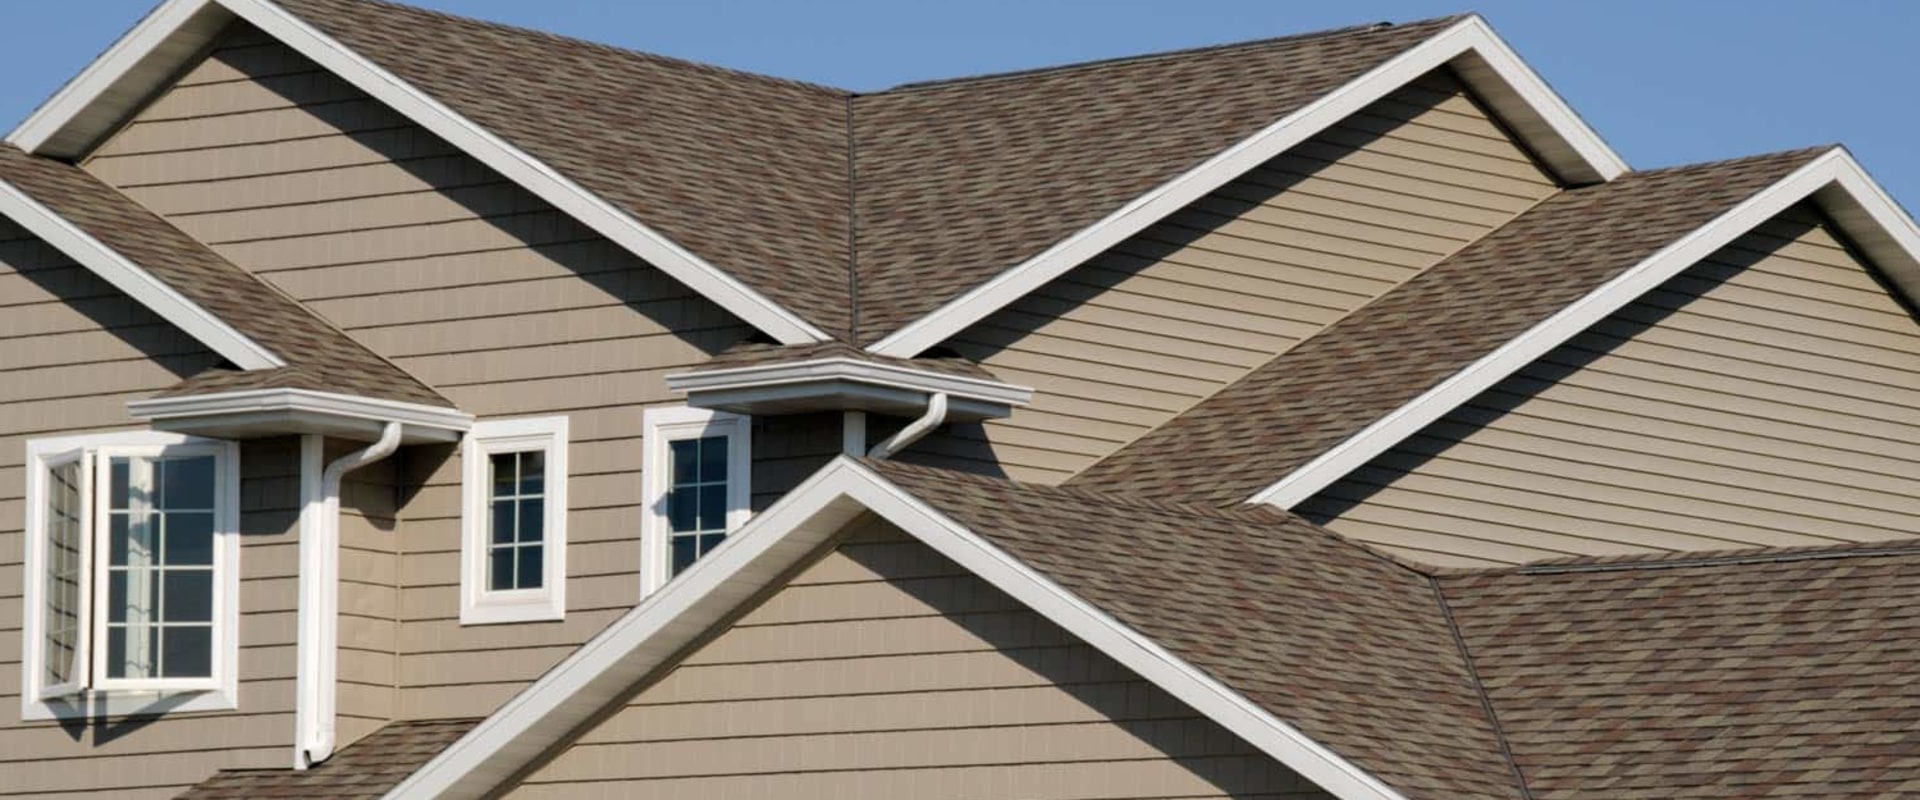 What time of year is best for roof replacement?